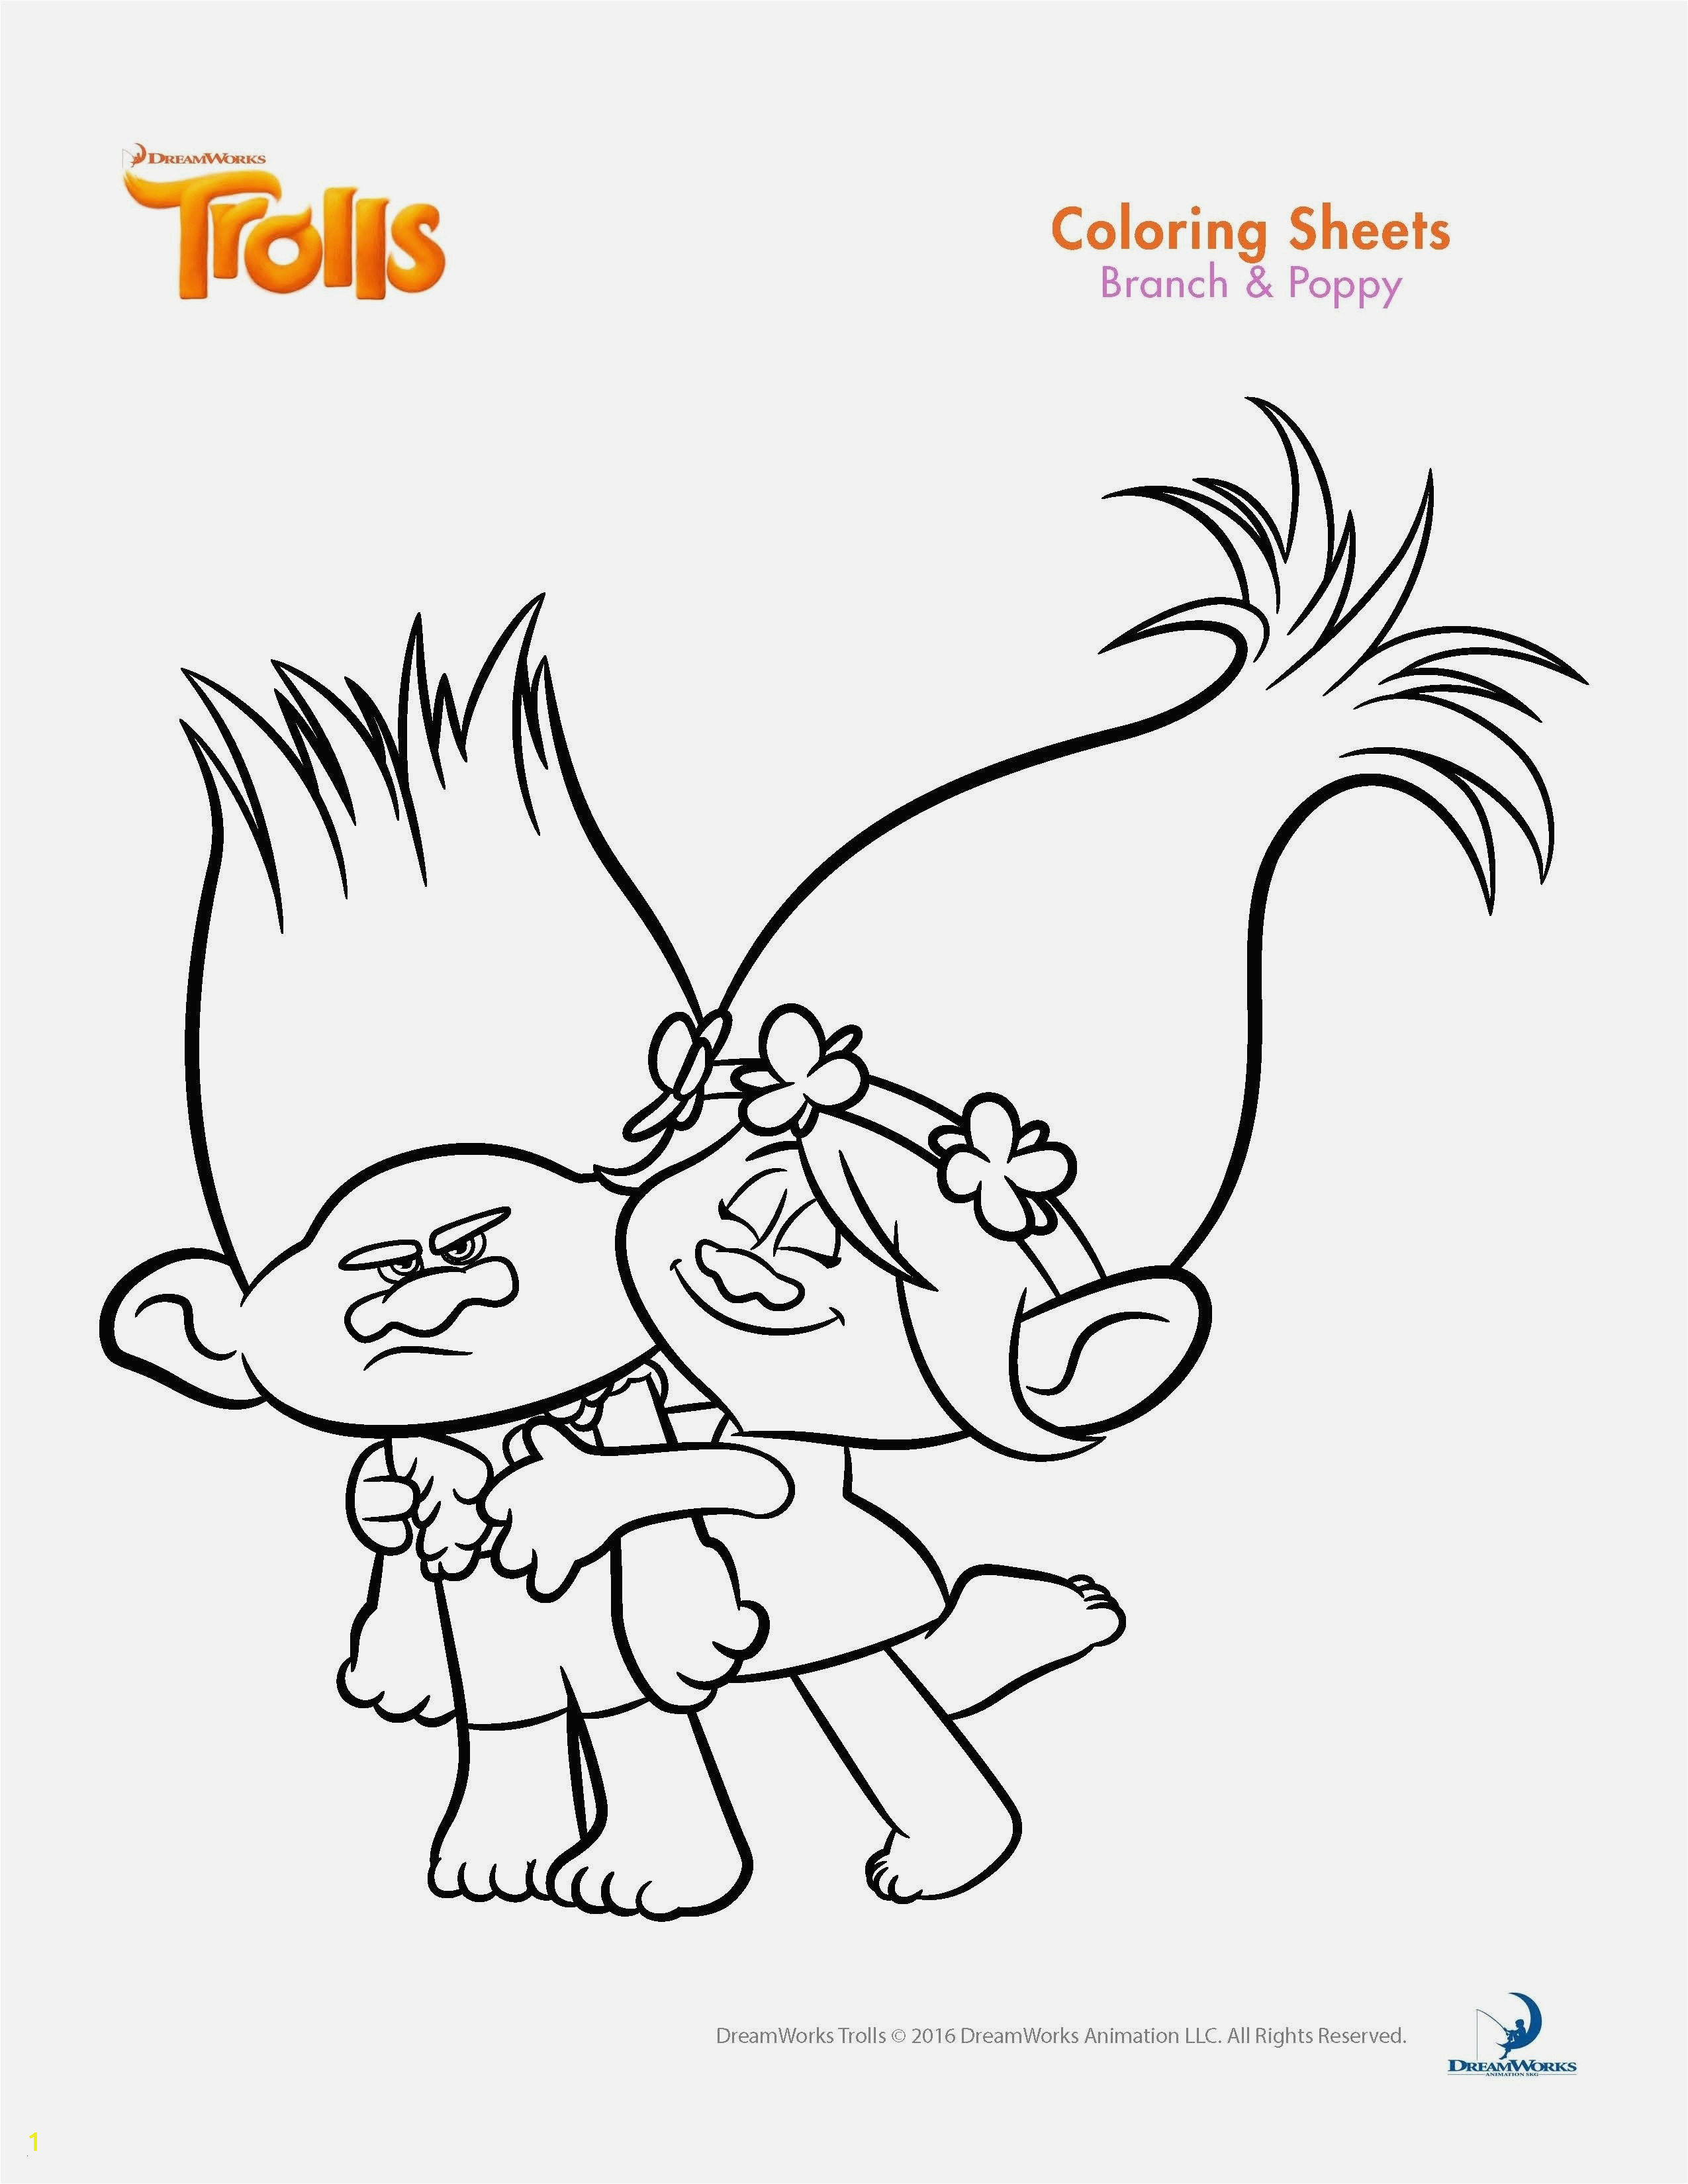 Free Trolls Coloring Pages top Free Printable Branch Trolls Coloring Pages 21csb Free Trolls Coloring